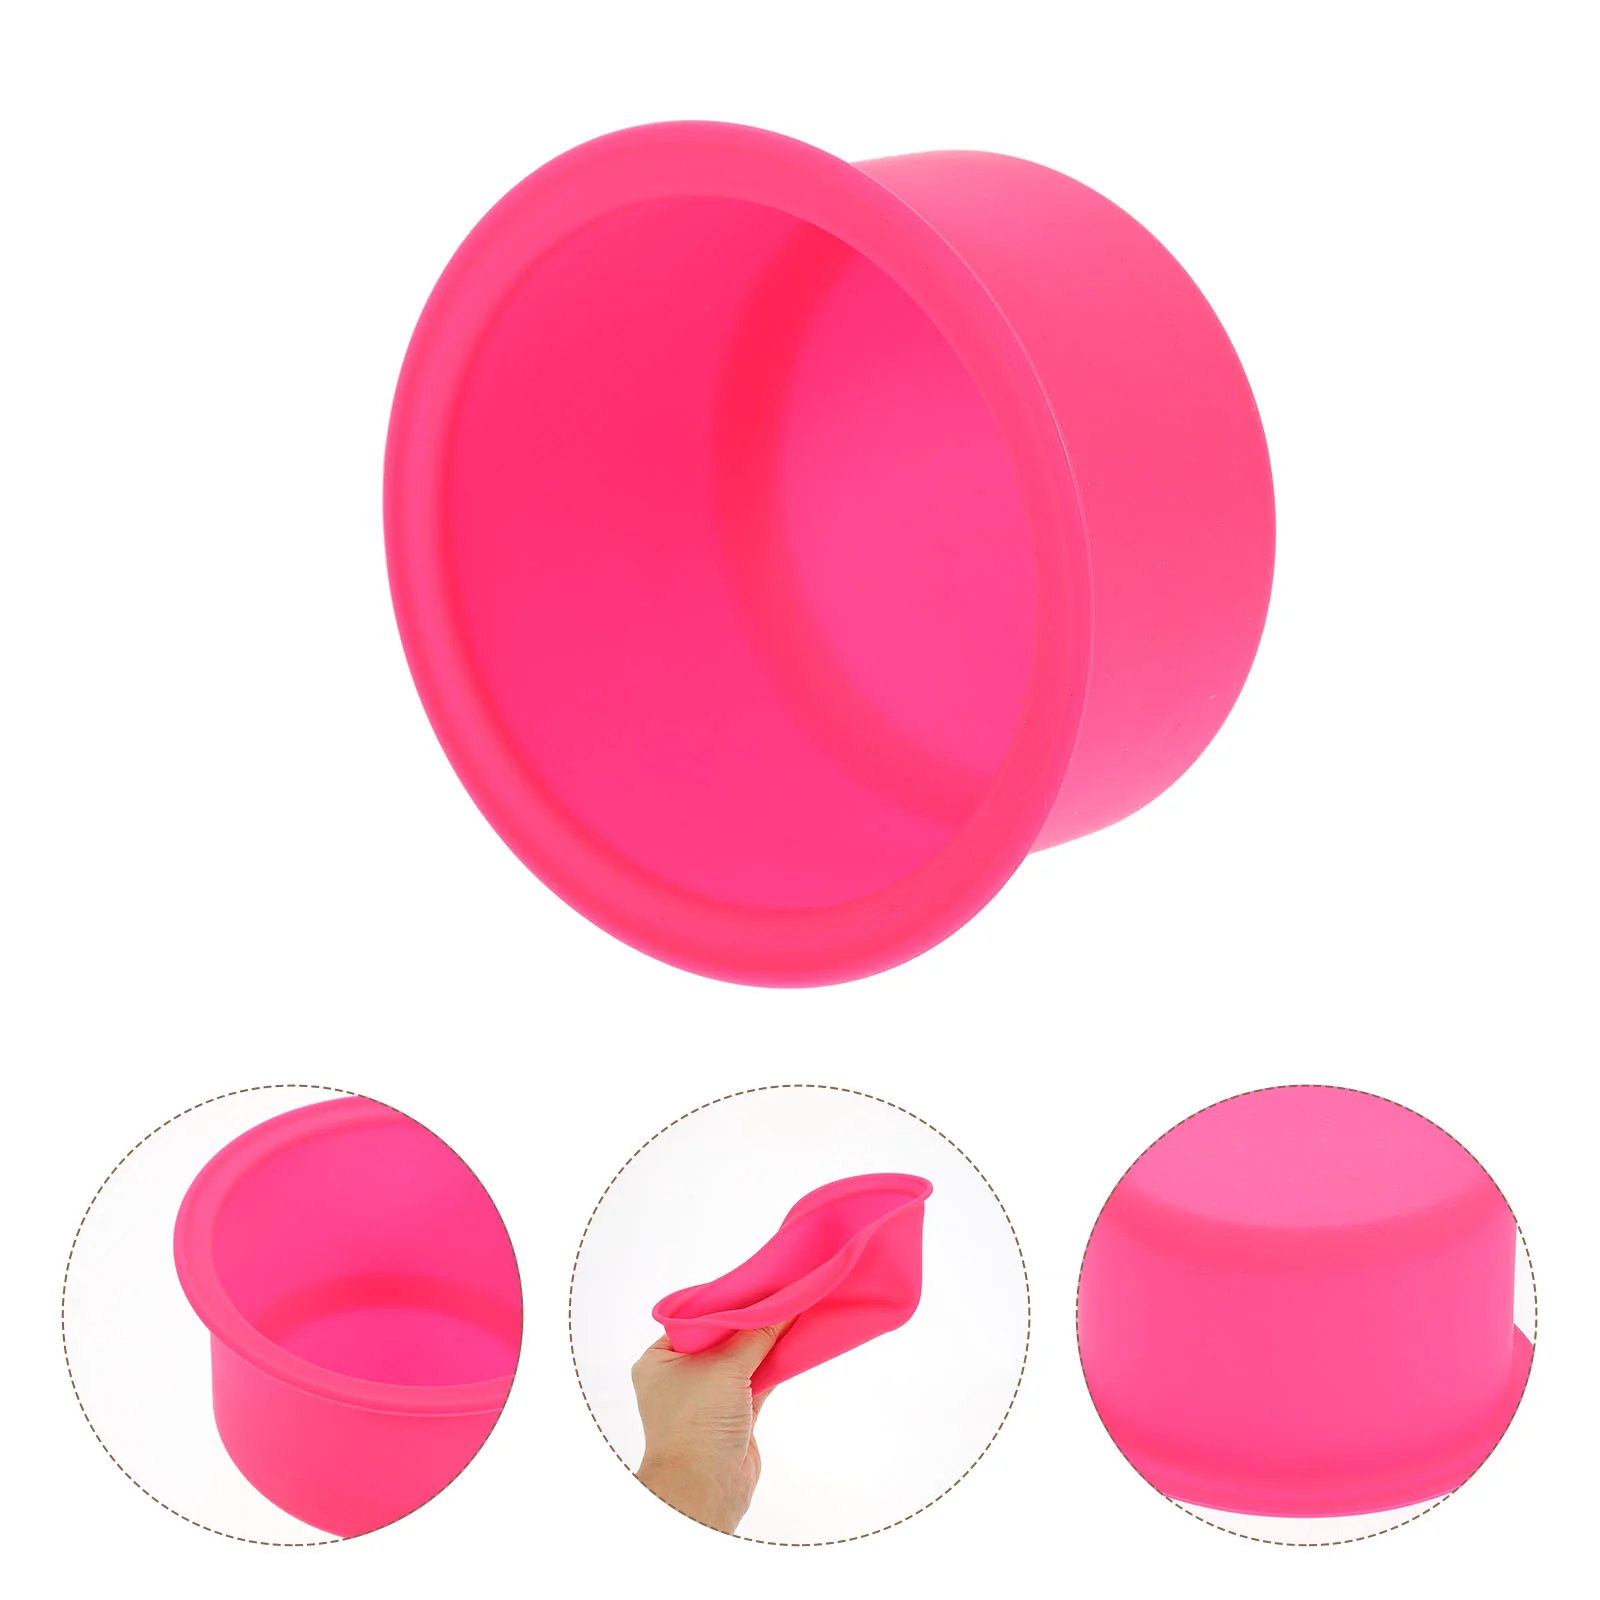 

Silicone Wax Melting Pot Wax Melting Bowl Non-Stick Wax Heater Inner Bowl Hair Removal Waxing Pot Wax Warmer Bowl for Salon Home